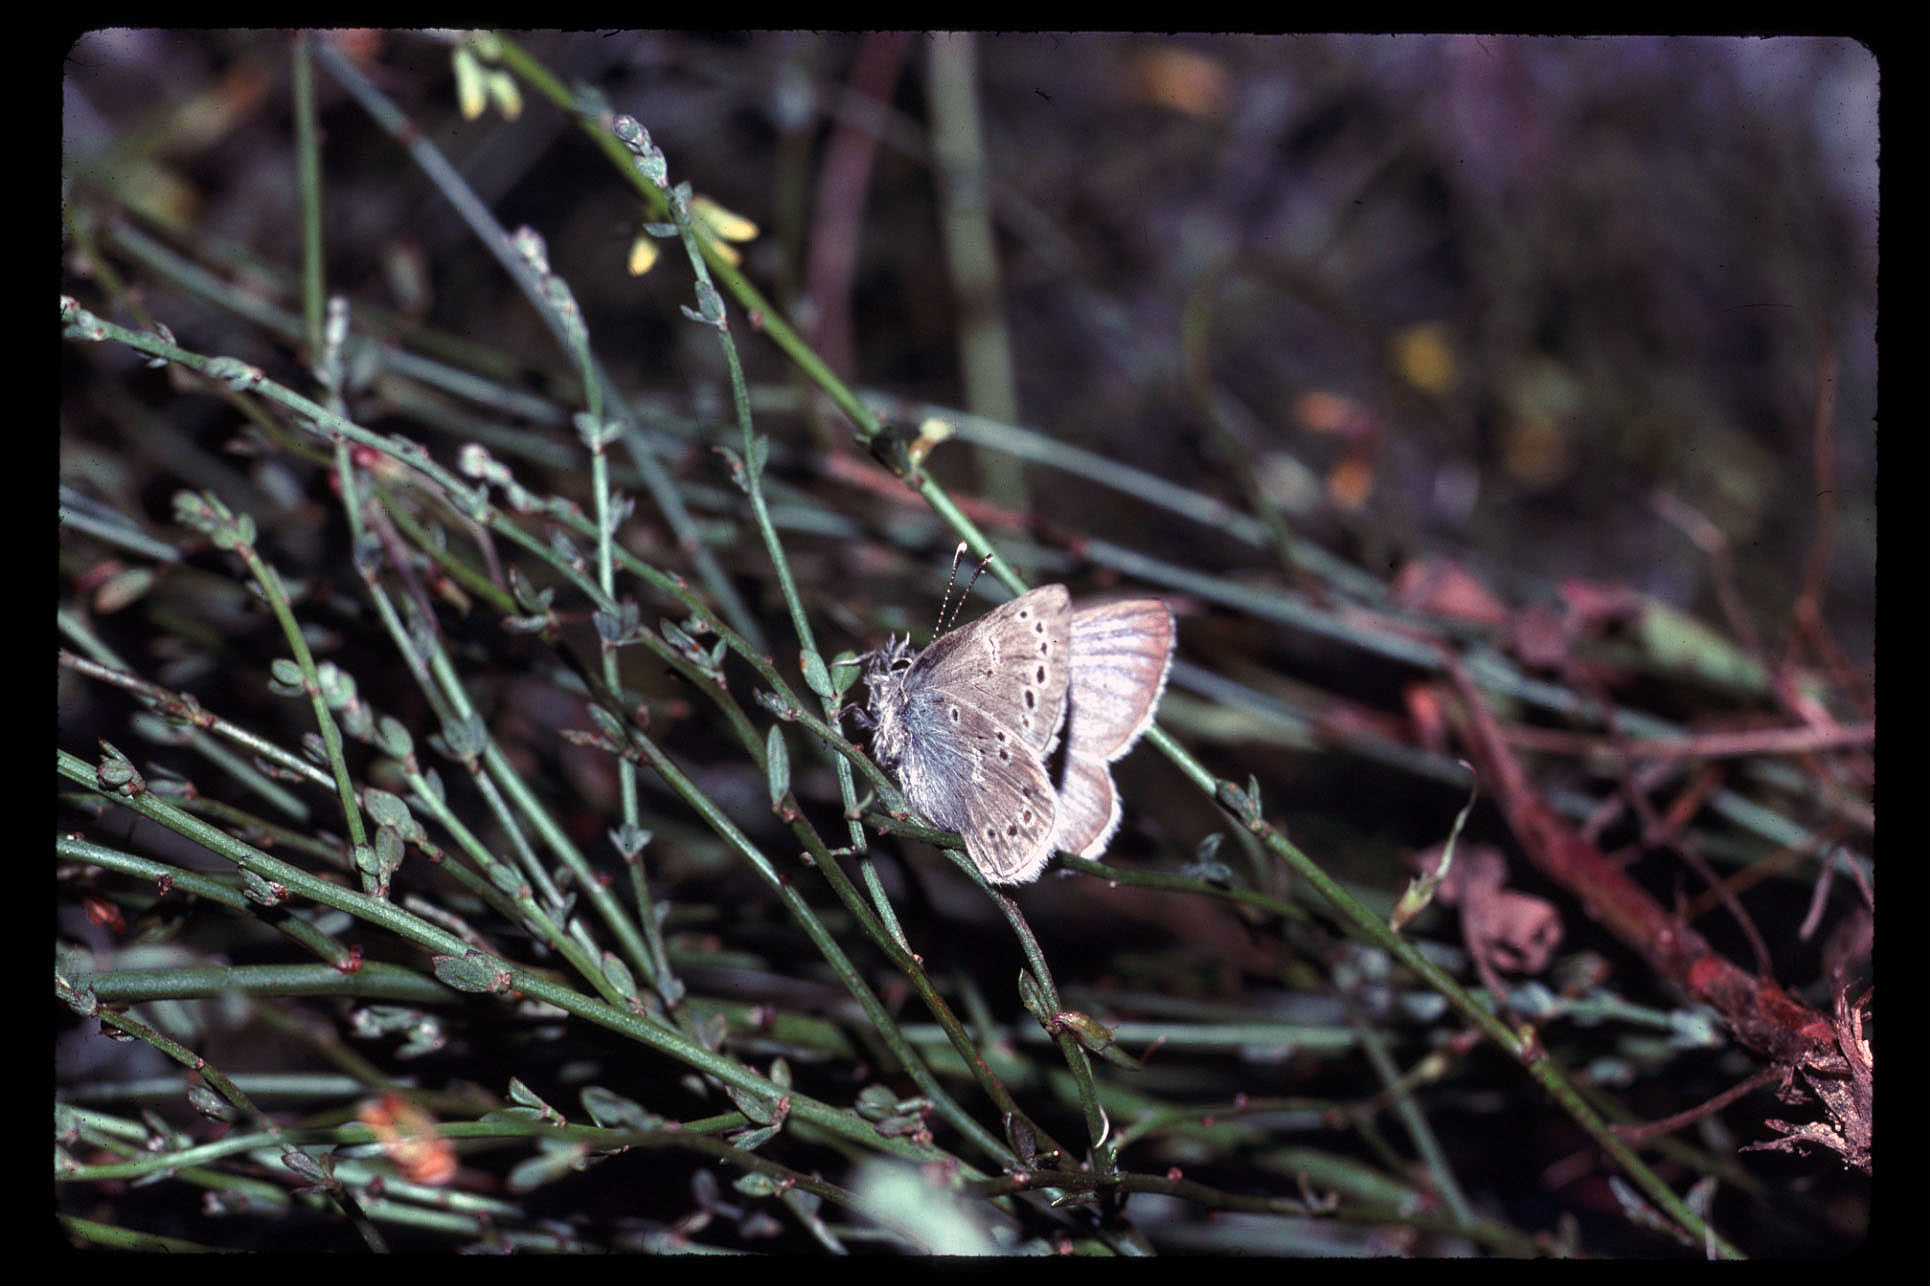 A Xerces blue butterfly resting on the green stems of deerweed